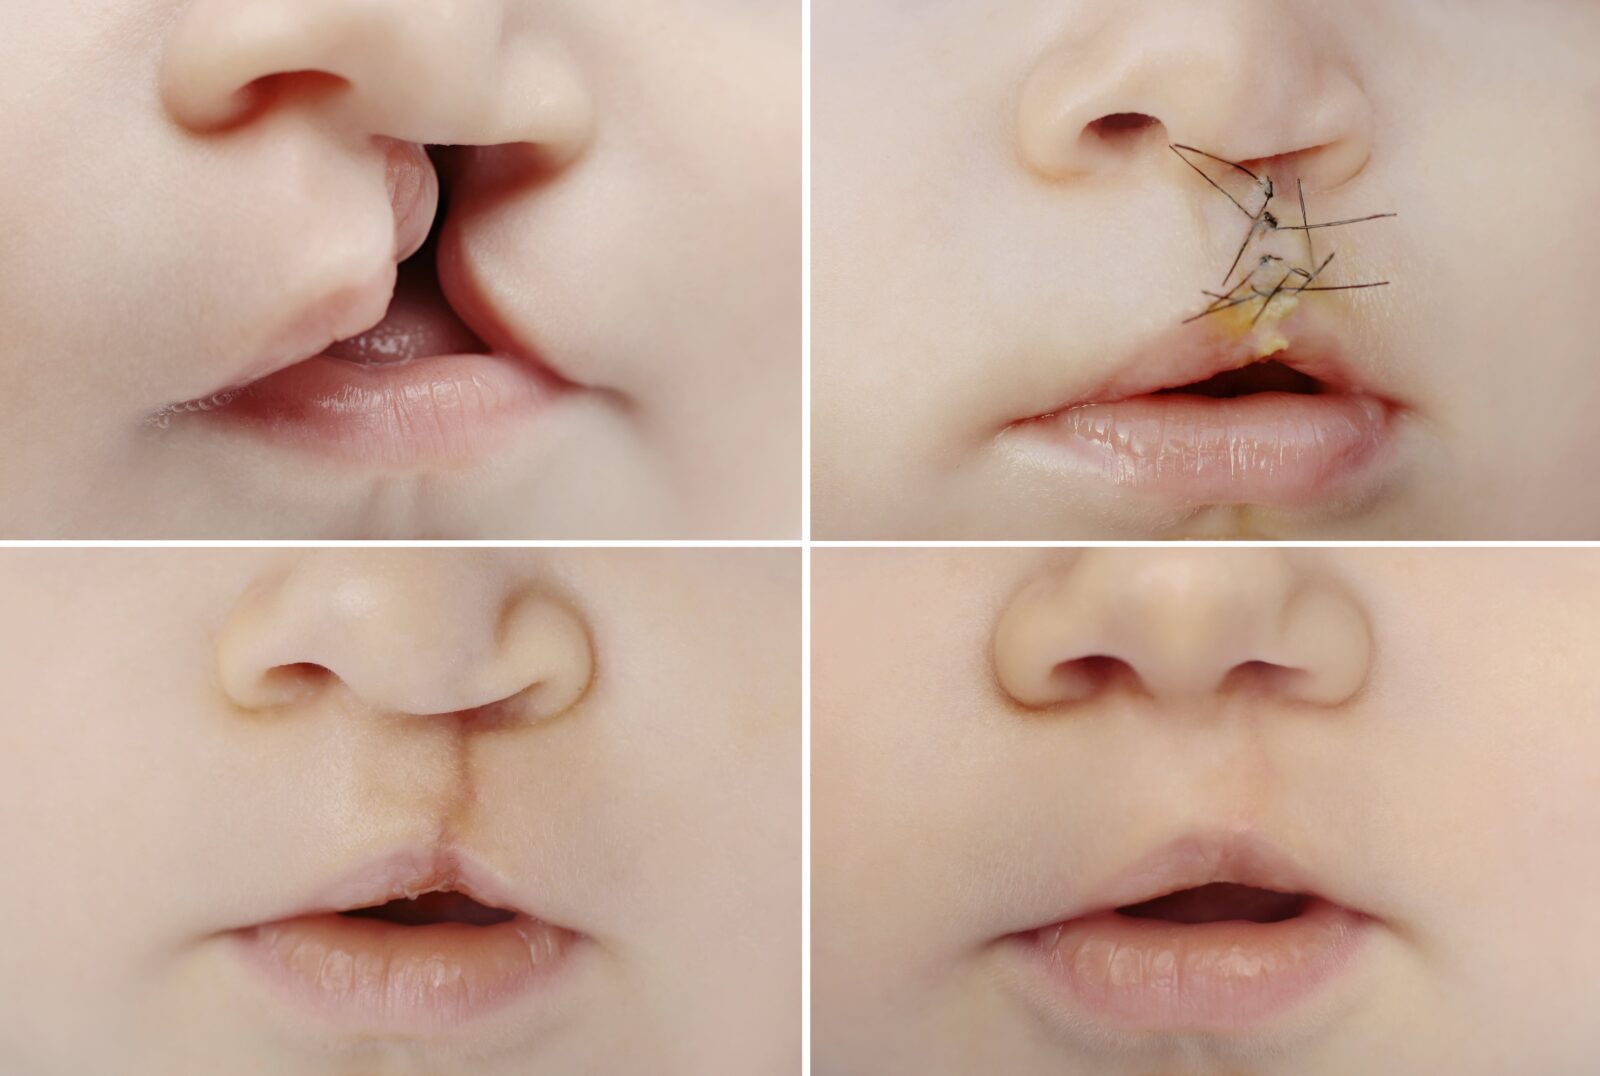 surgical repair of cleft lip and palate